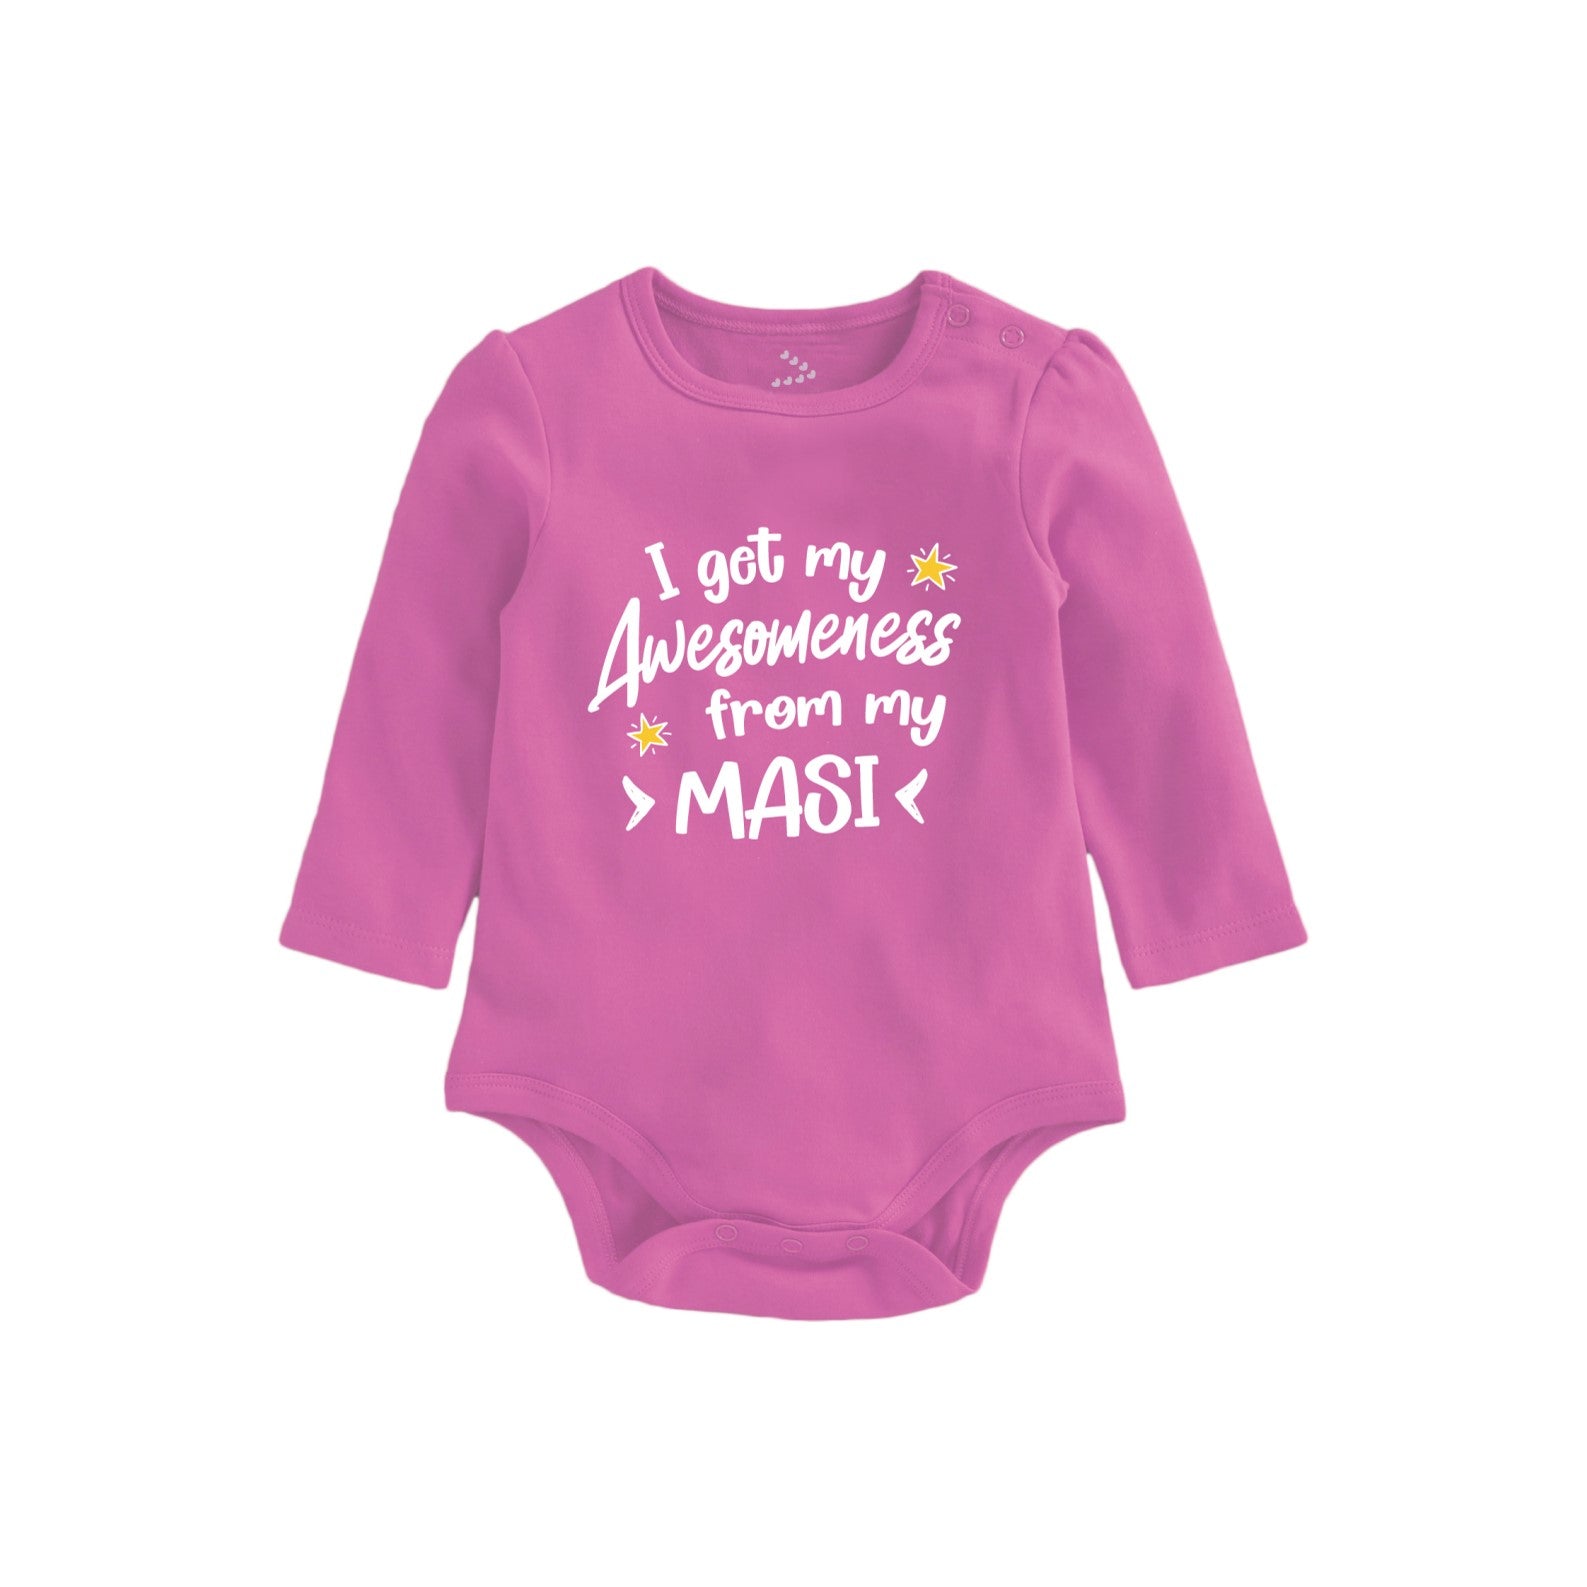 I Get My Awesomeness from Masi Printed Baby Onesie Pink Full-Sleeves